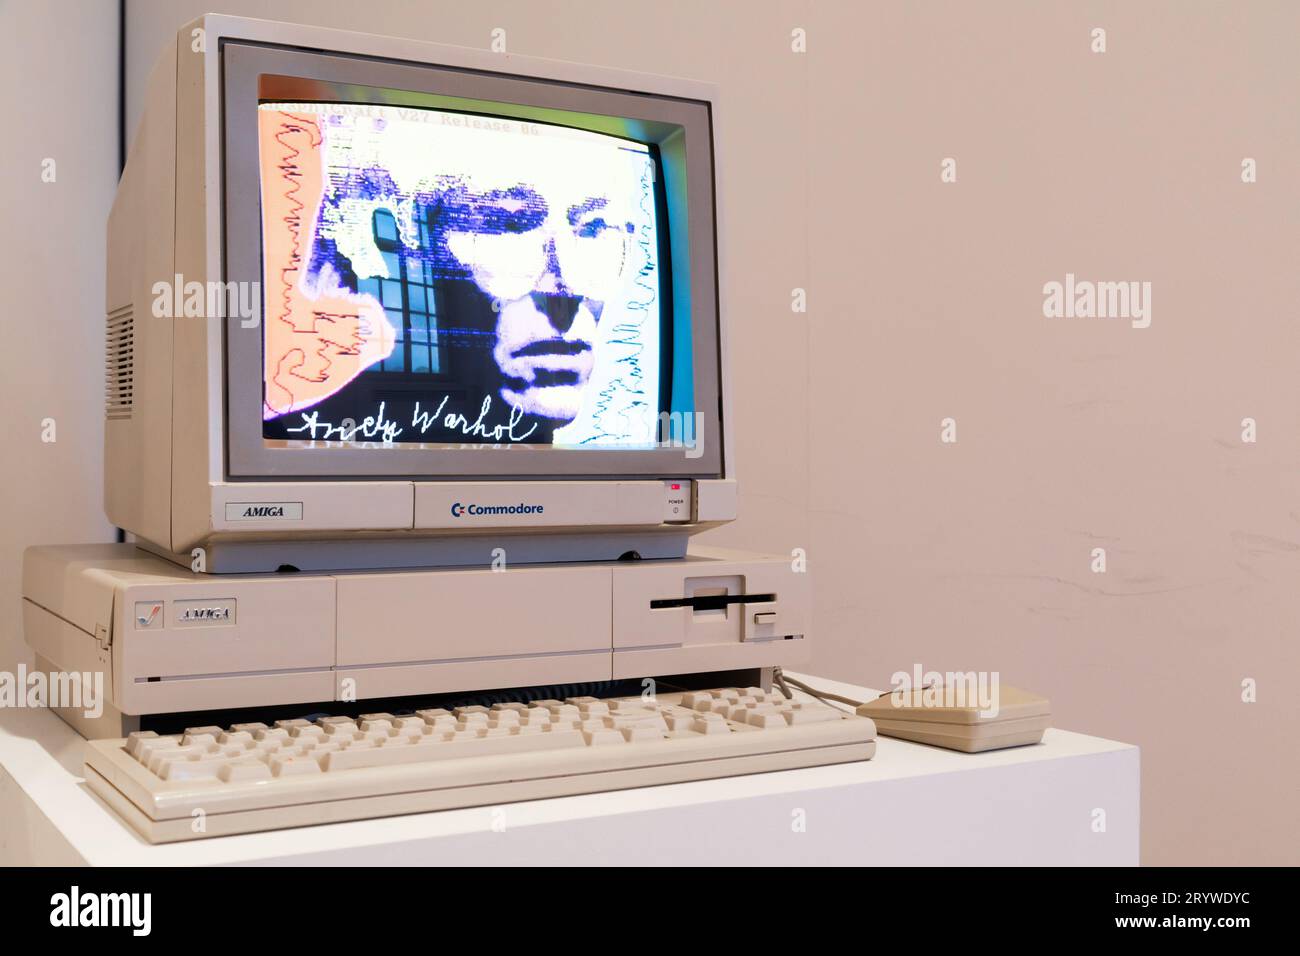 Computer Commodore Amiga 1000 with floppy disk and mouse Stock Photo